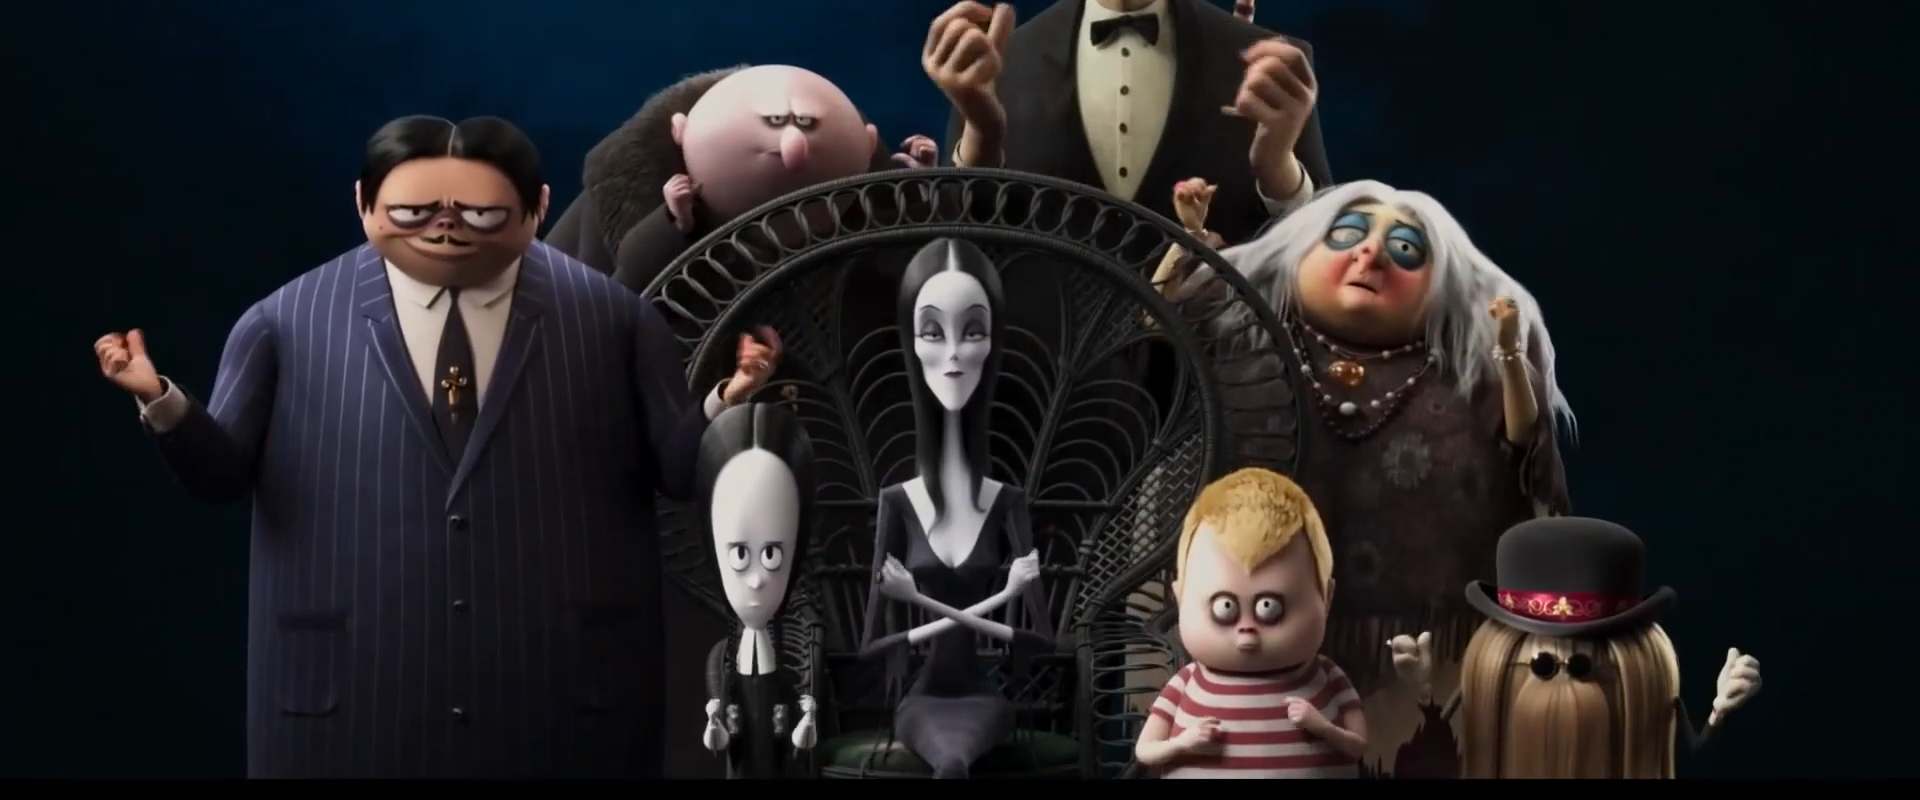 The Addams Family 2 background 1